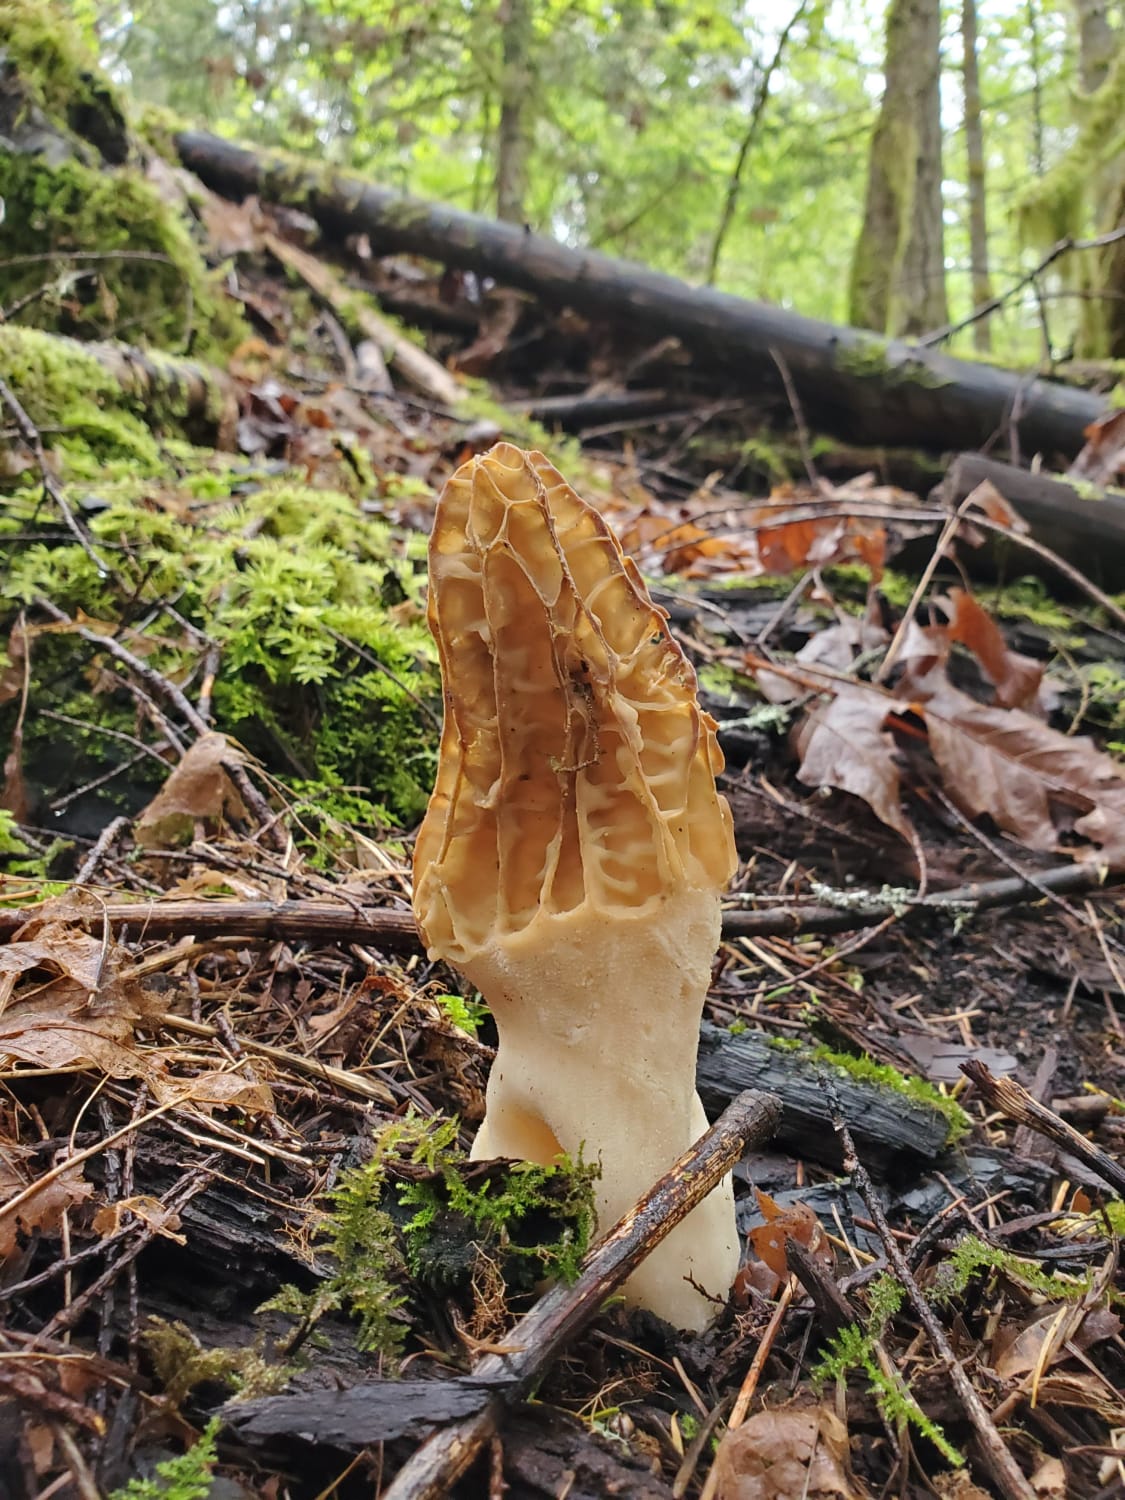 The holy grail of mushrooms, the elusive morel. They grow anywhere, just not everywhere!